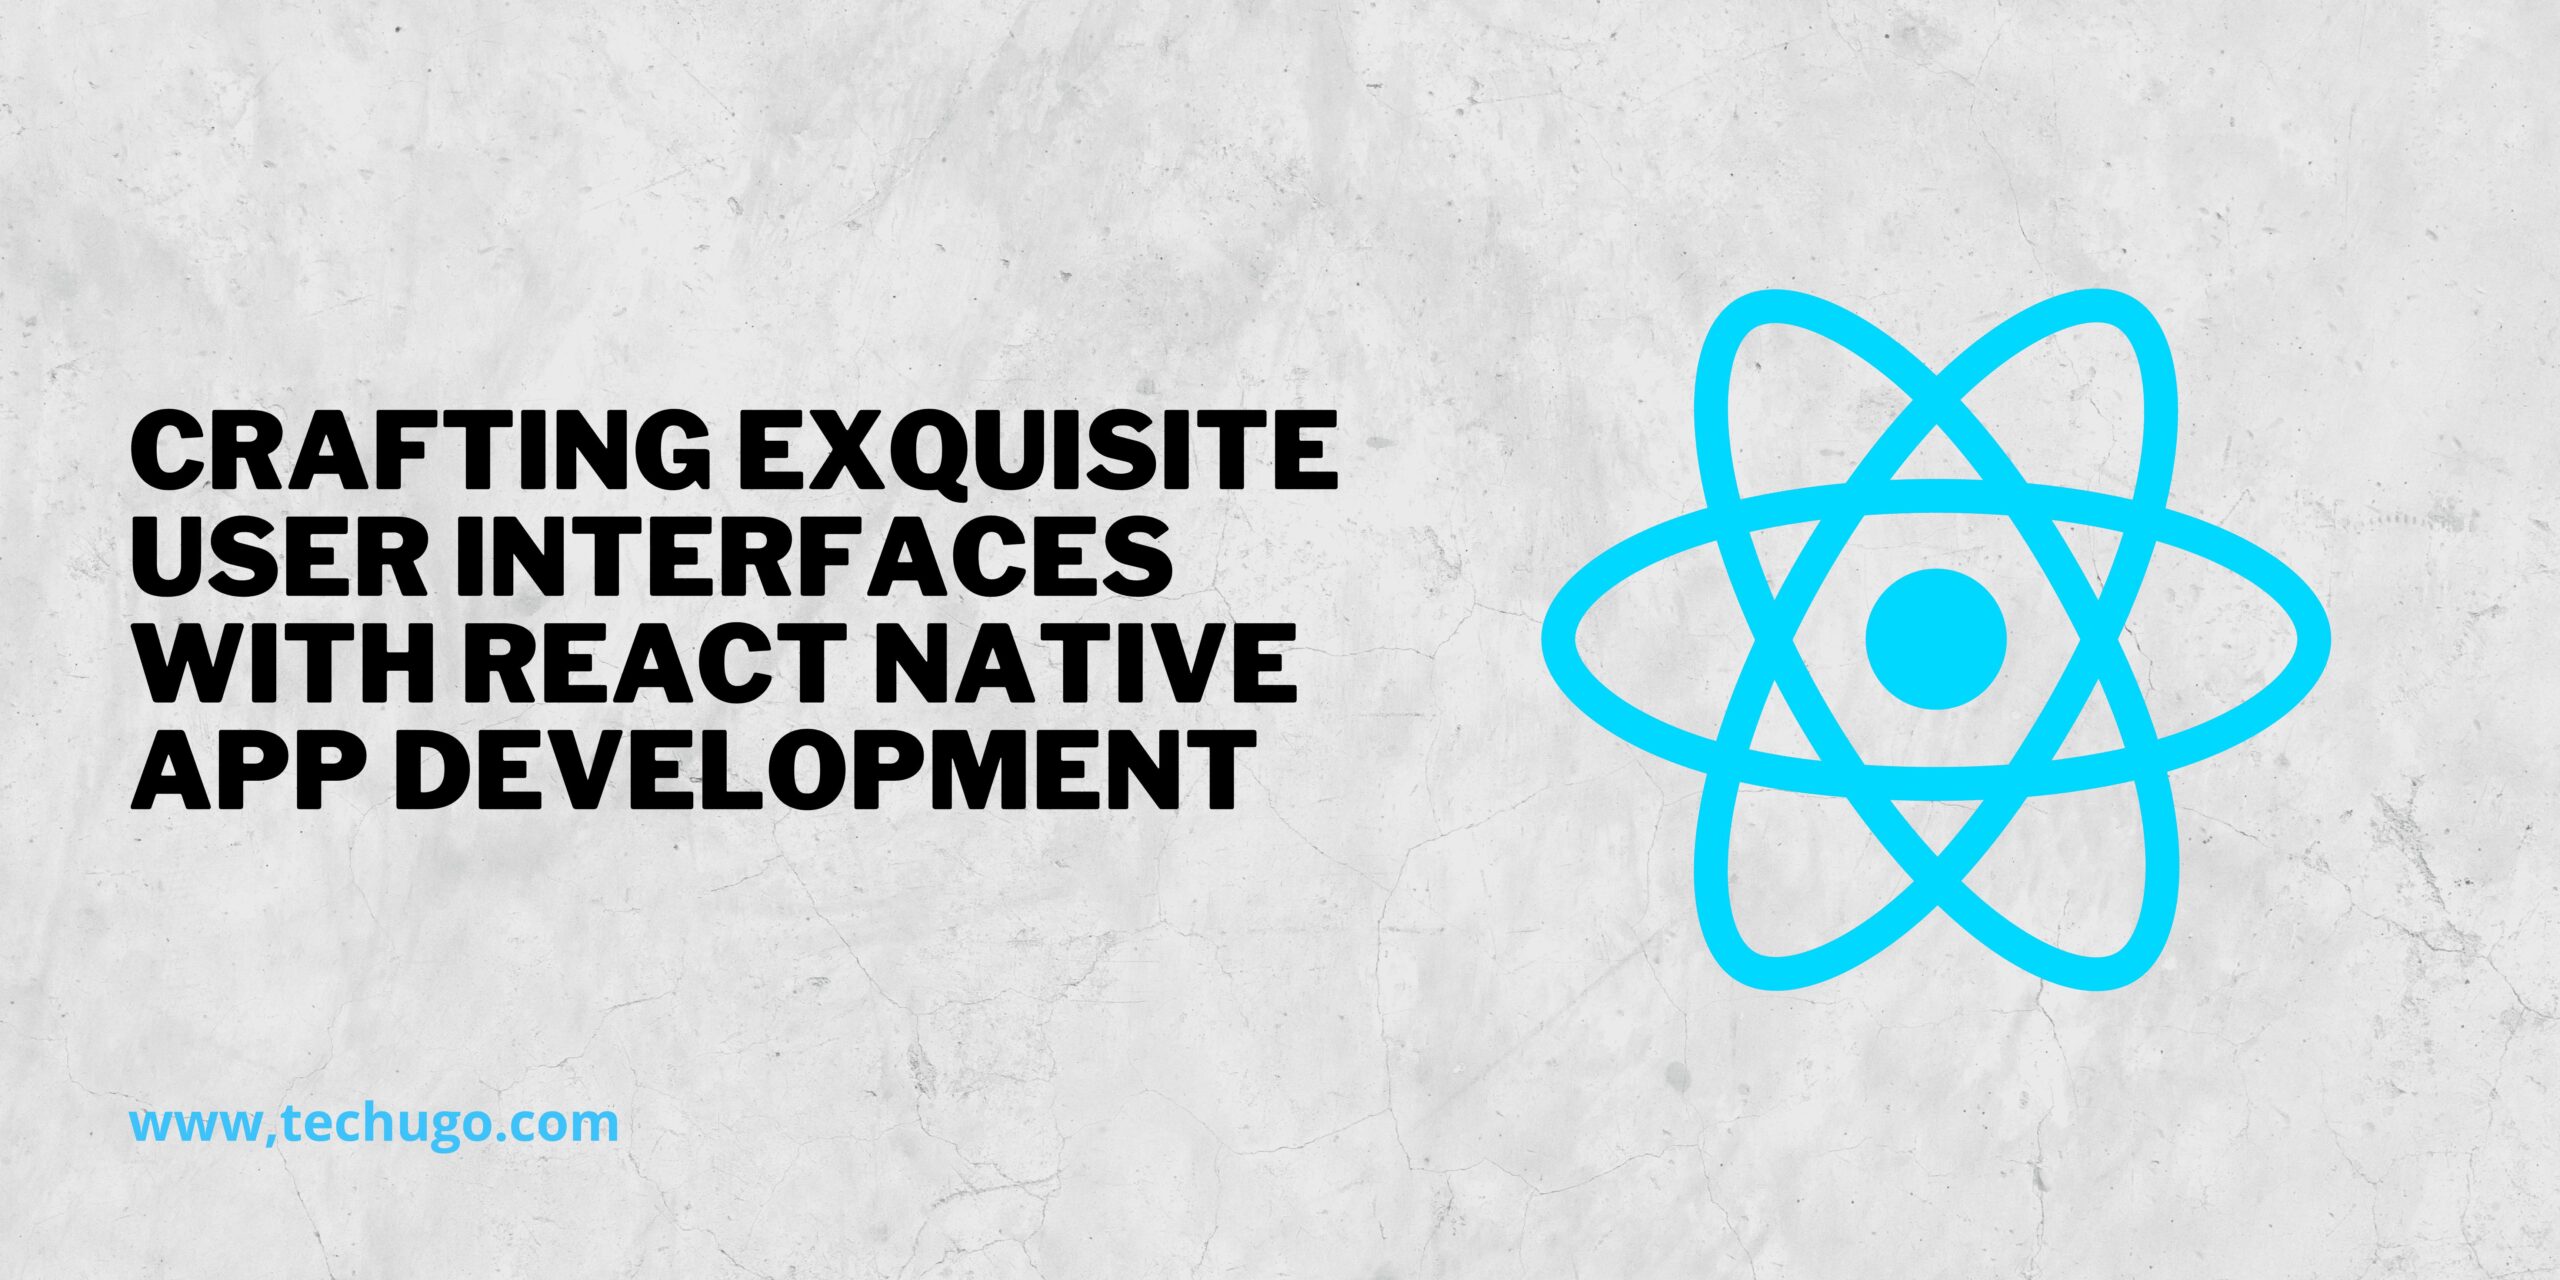 Crafting Exquisite User Interfaces with React Native App Development